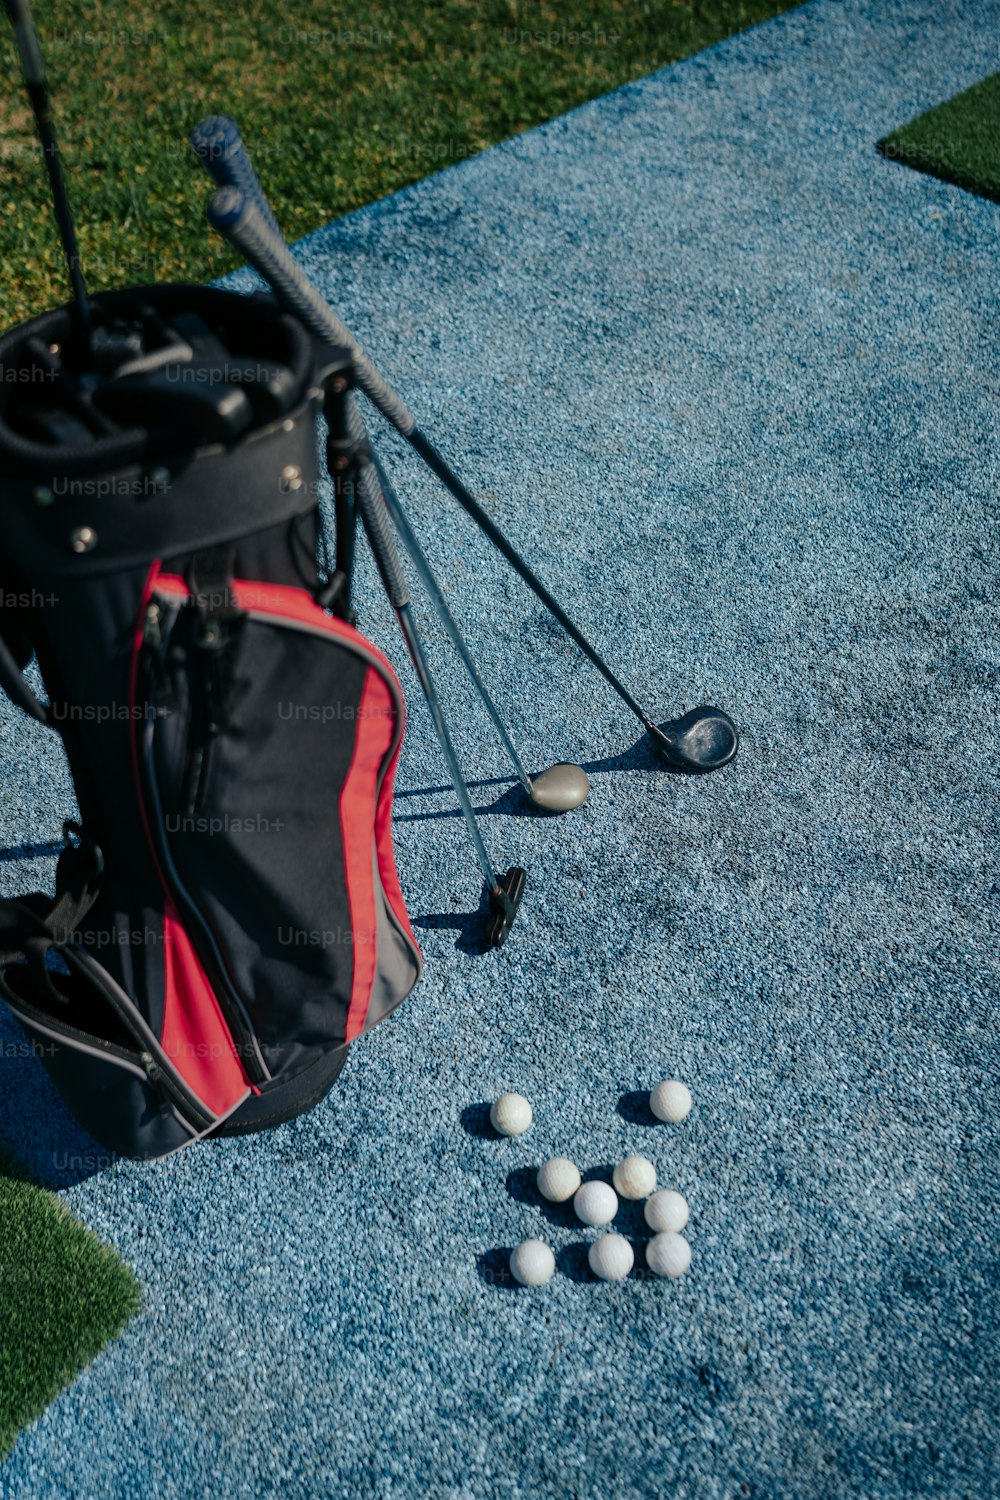 a bag of golf balls sitting on the ground next to a golf club